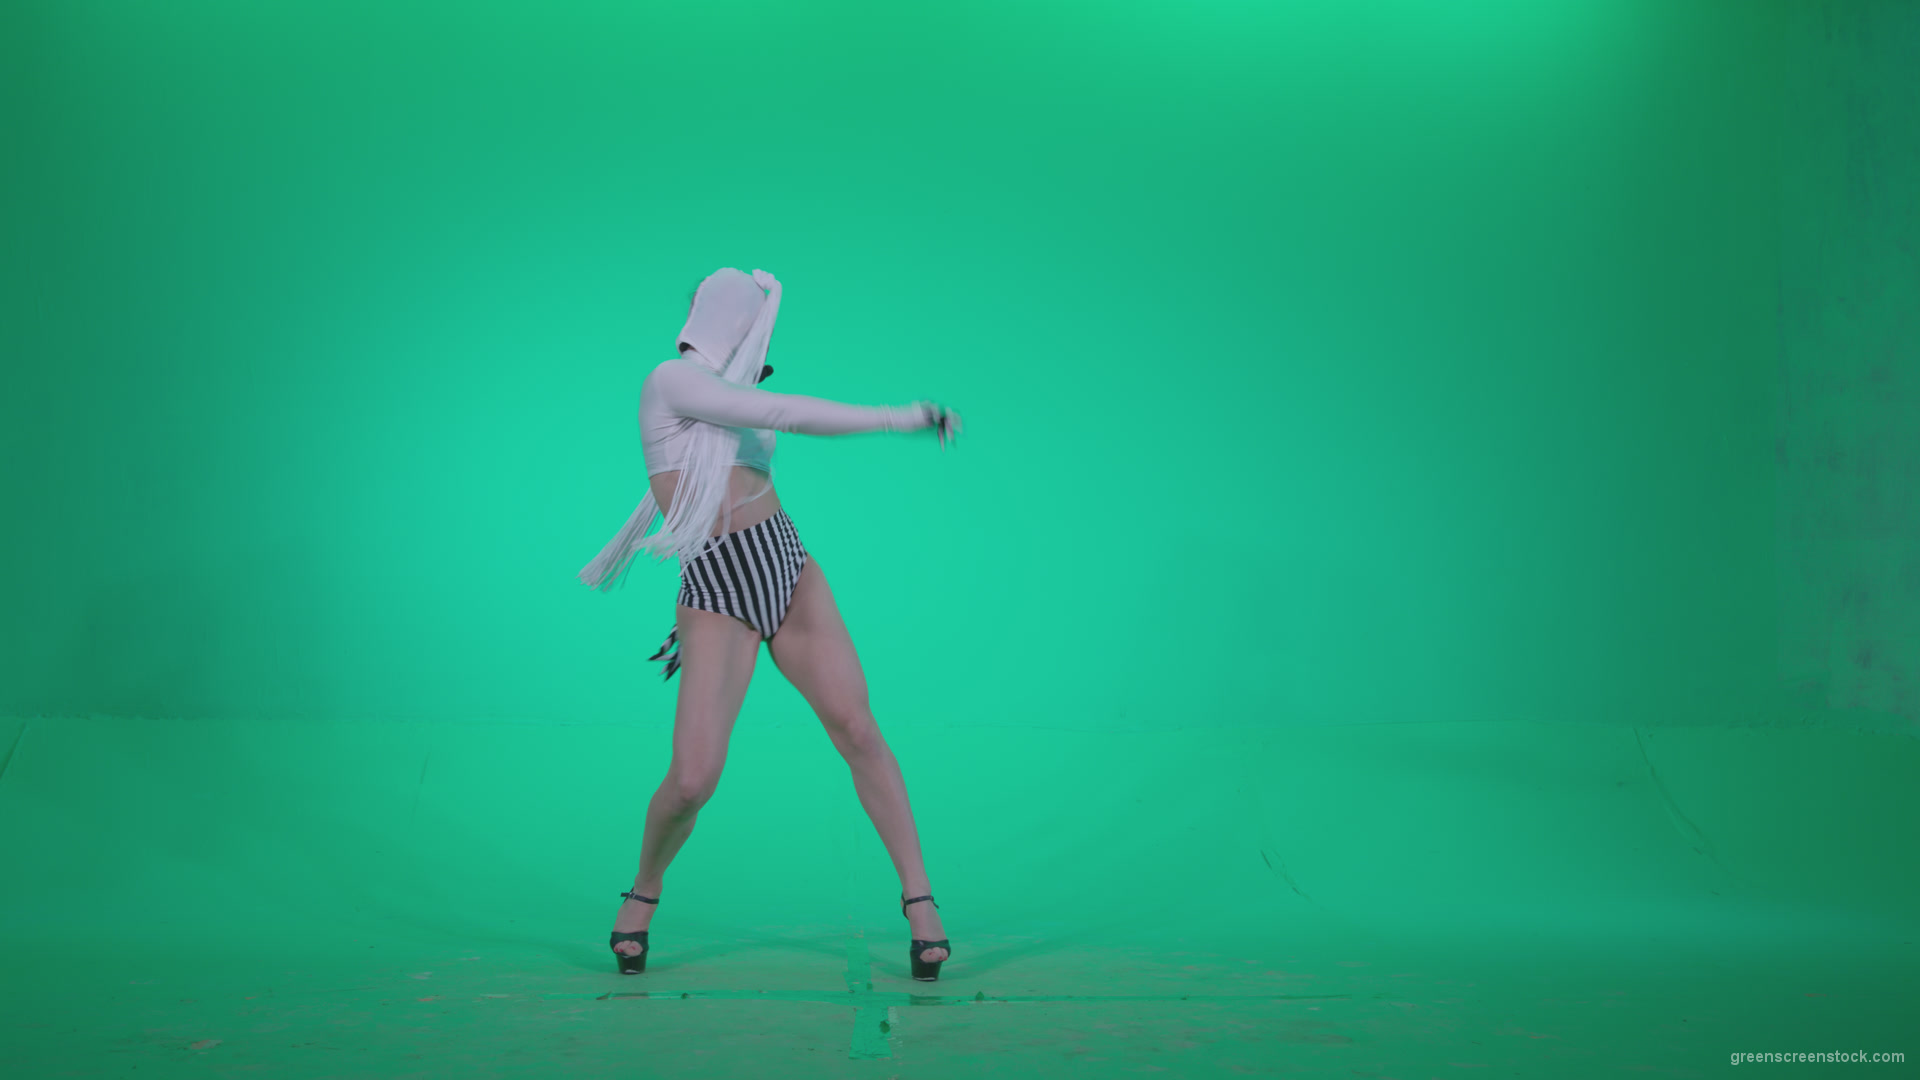 Go-go-Dancer-with-Latex-Top-t7-Green-Screen-Video-Footage_005 Green Screen Stock